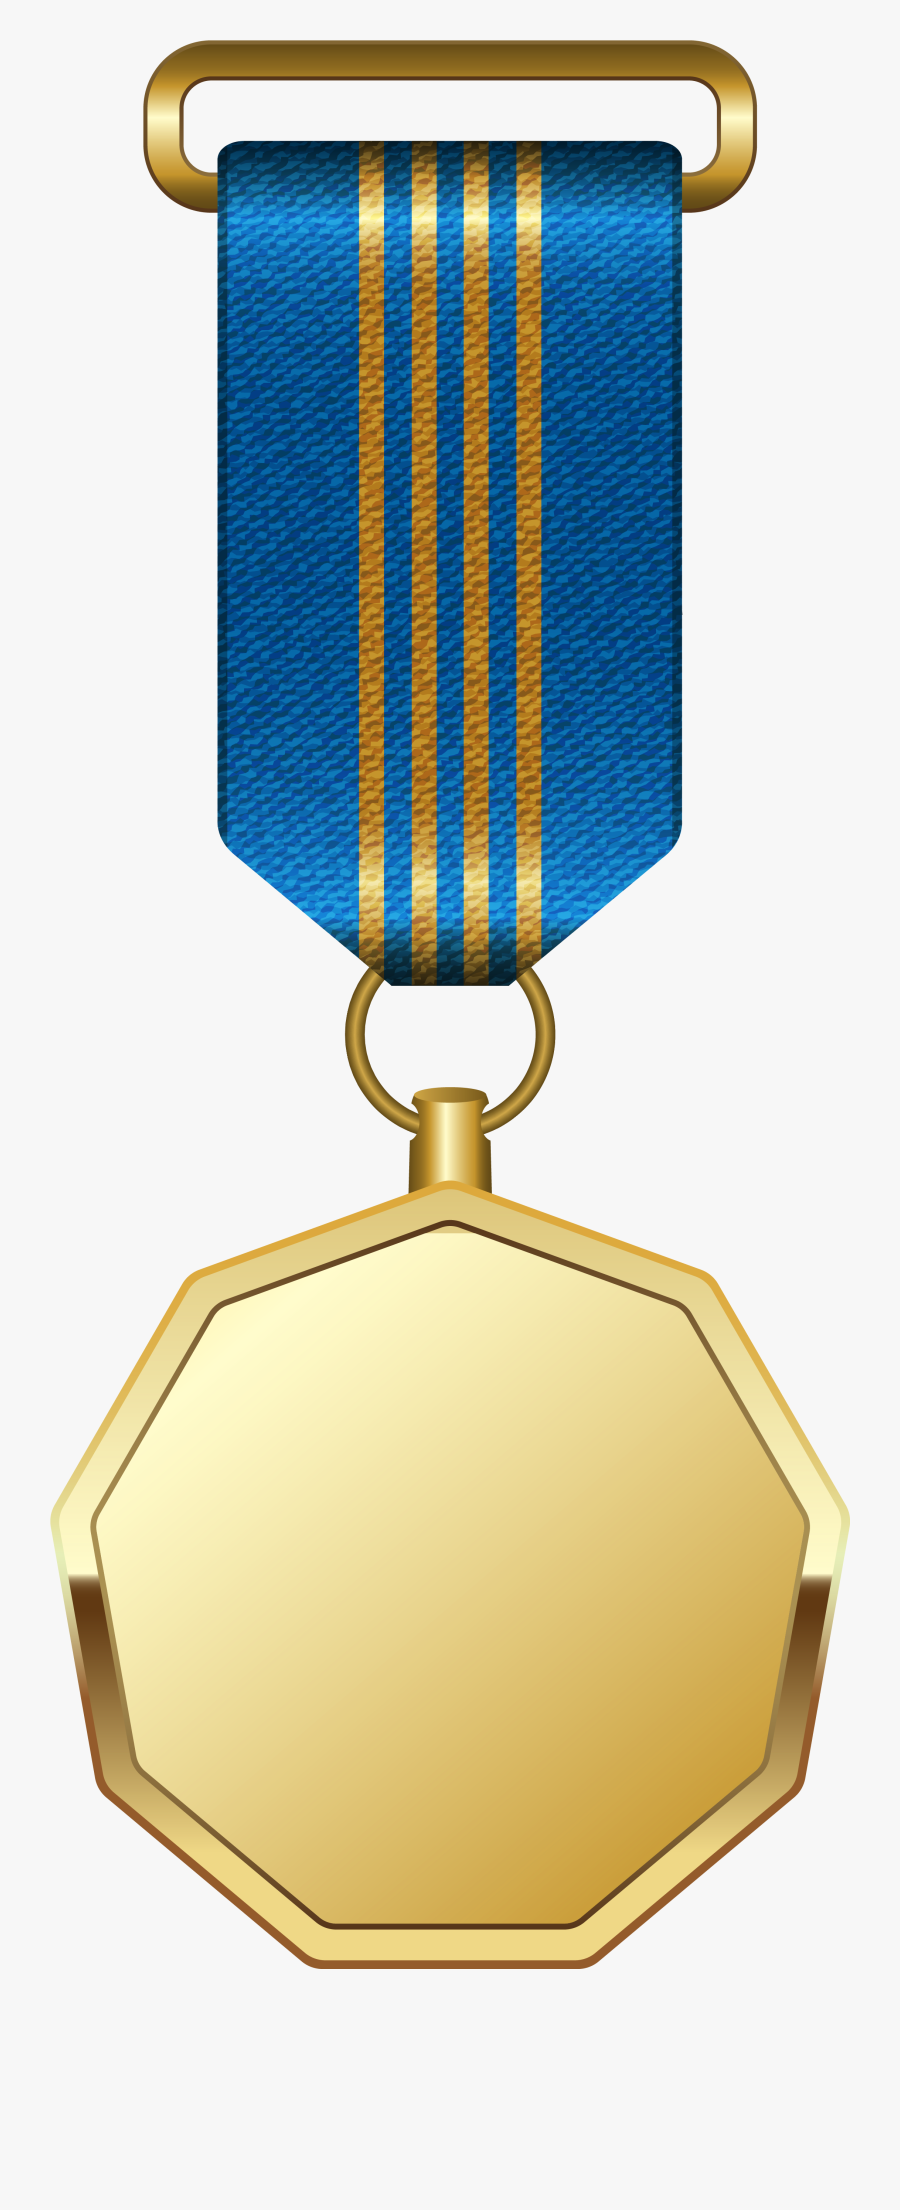 Gold Medal With Blue Ribbon Png Clipart Picture - Medal Png, Transparent Clipart